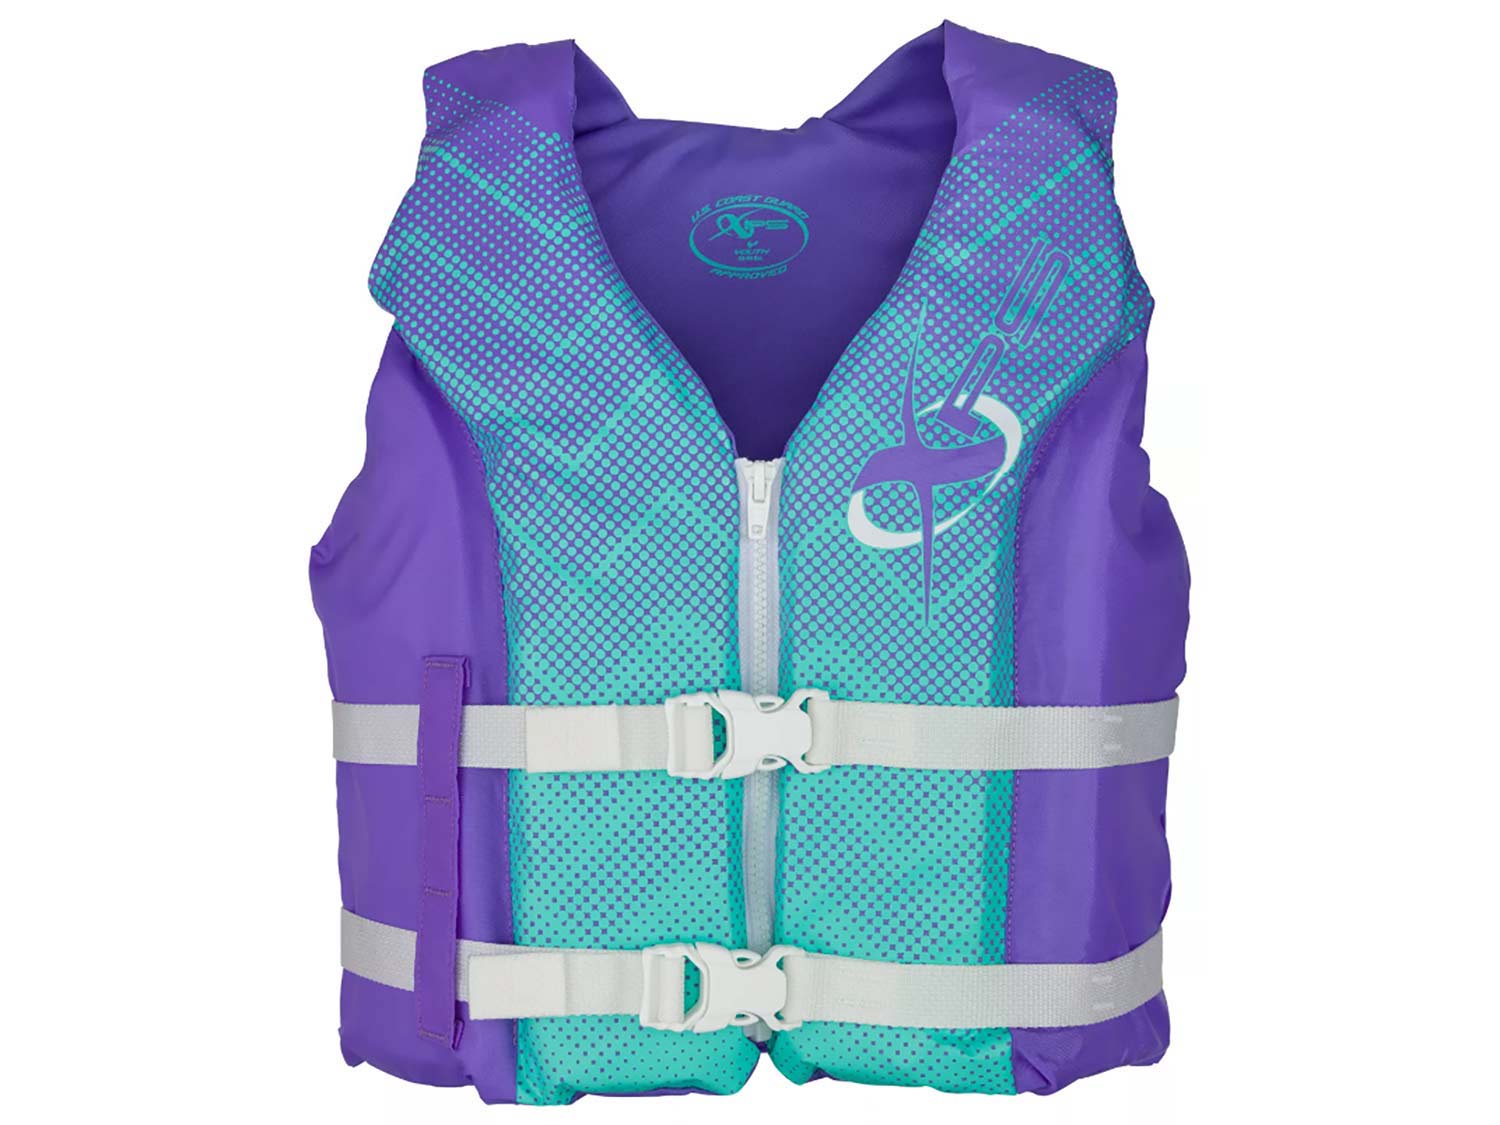 Details about   Fishing Life Jacket Water Sports Floatation Vest Adults Children Buoyancy X5F9 